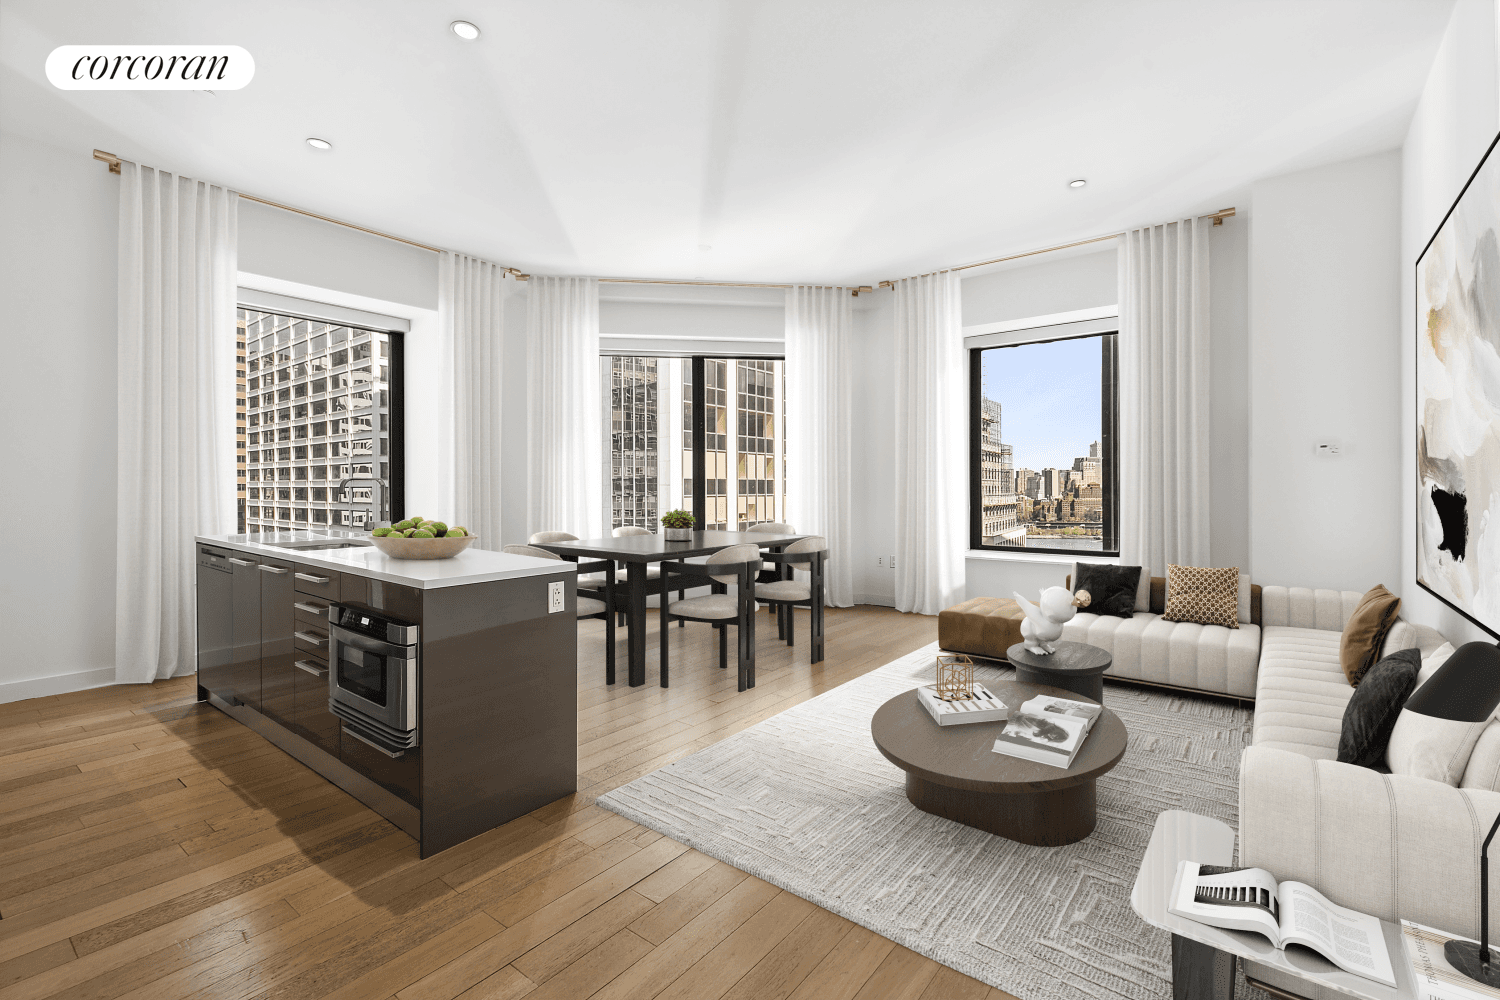 Breathtaking River Views Oversized 6ft Windows Over 1, 400 SqFt Top Tier Features Throughout75 Wall Street, Residence 22O is an exquisite split corner 2 Bedroom, 2 Bathroom unit showcasing breathtaking ...